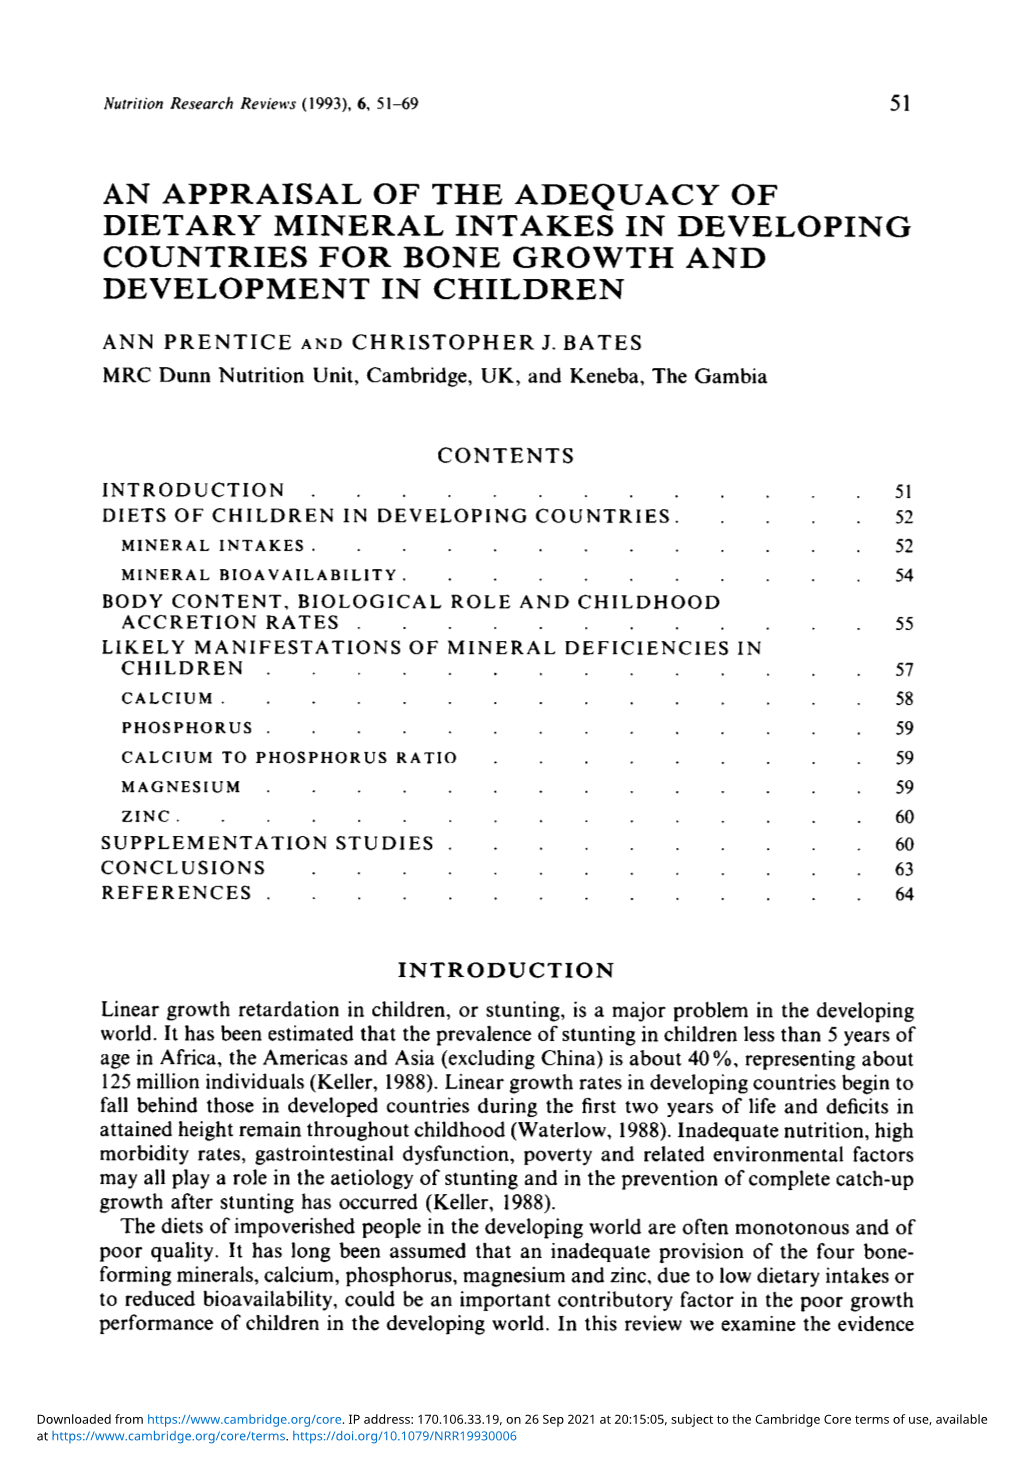 An Appraisal of the Adequacy of Dietary Mineral Intakes in Developing Countries for Bone Growth and Development in Children